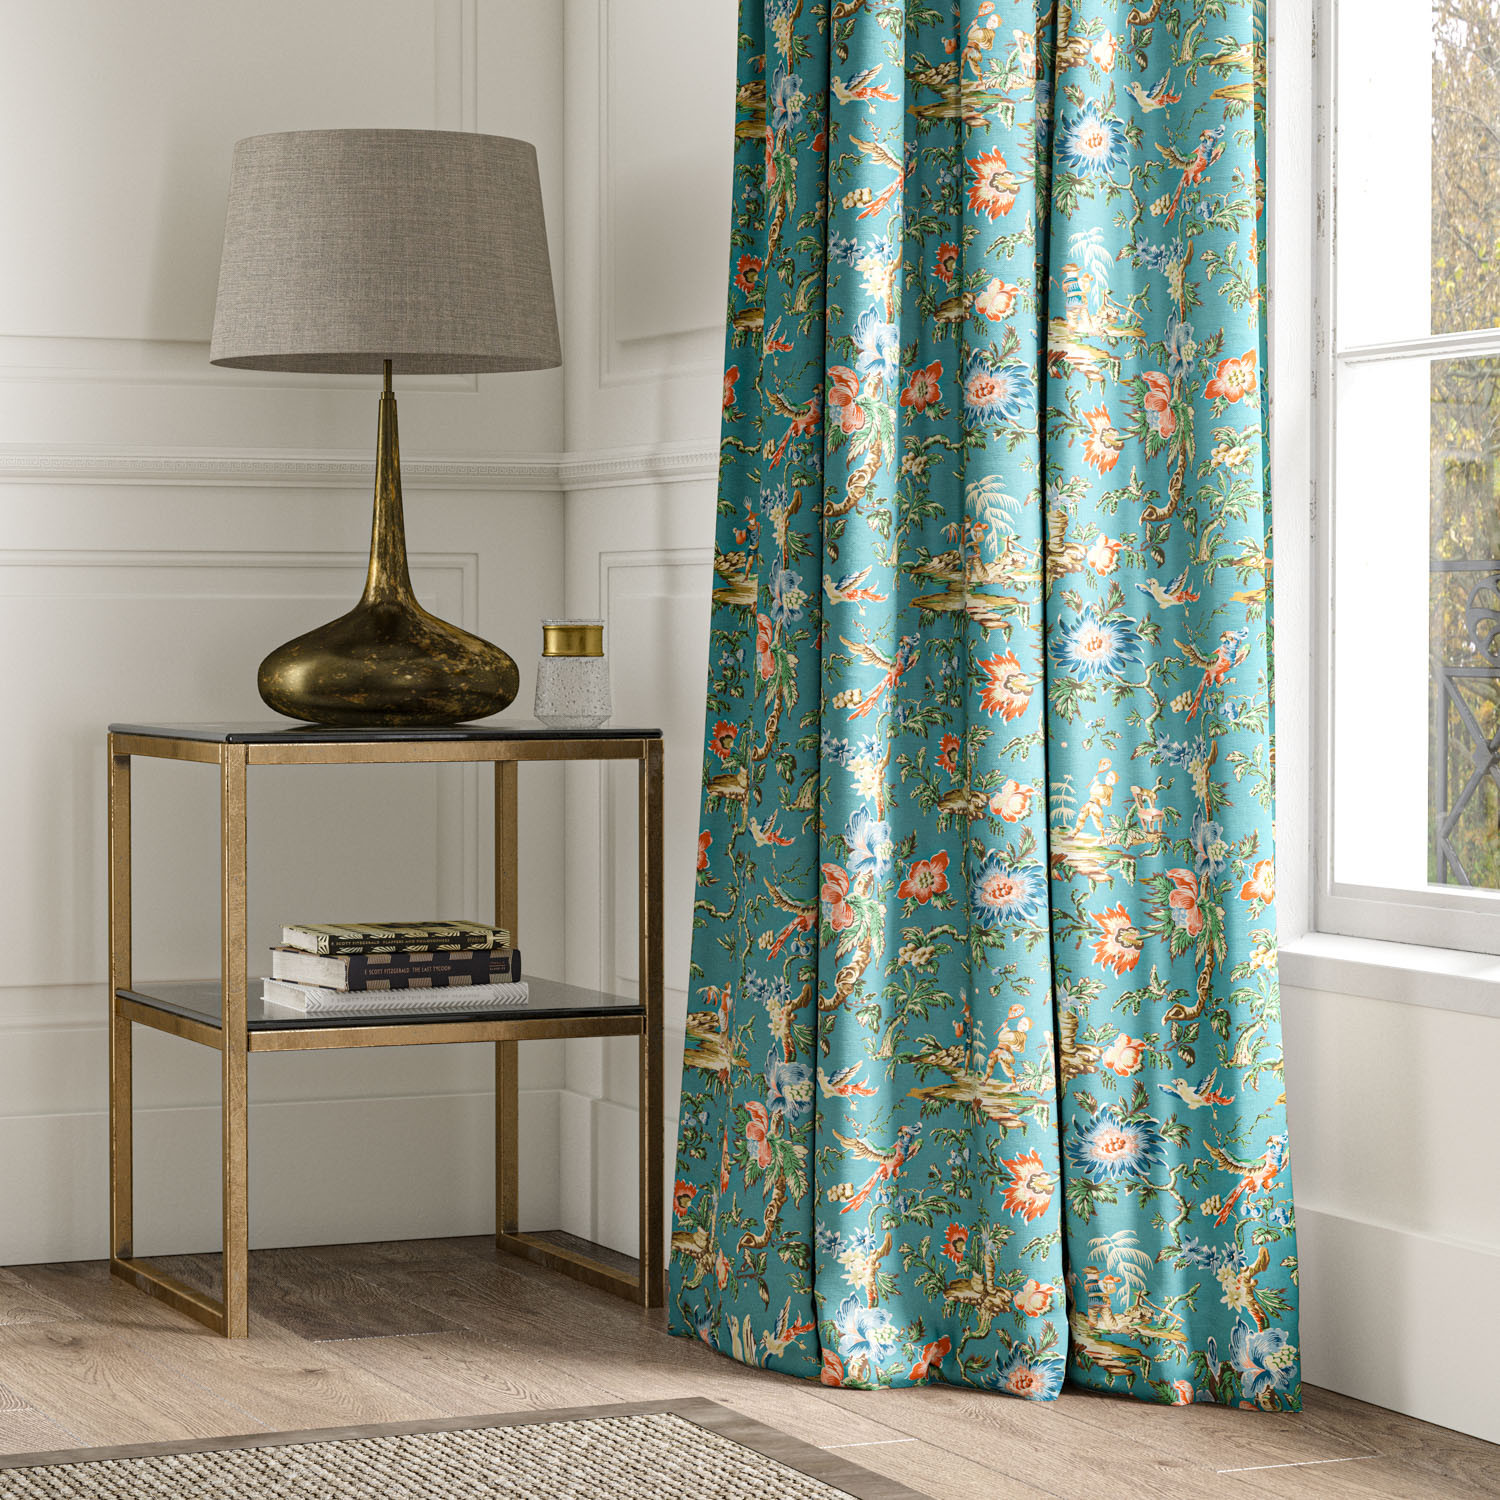 Chinese Garden Teal Linen Mix Made To Measure Curtains Warner House